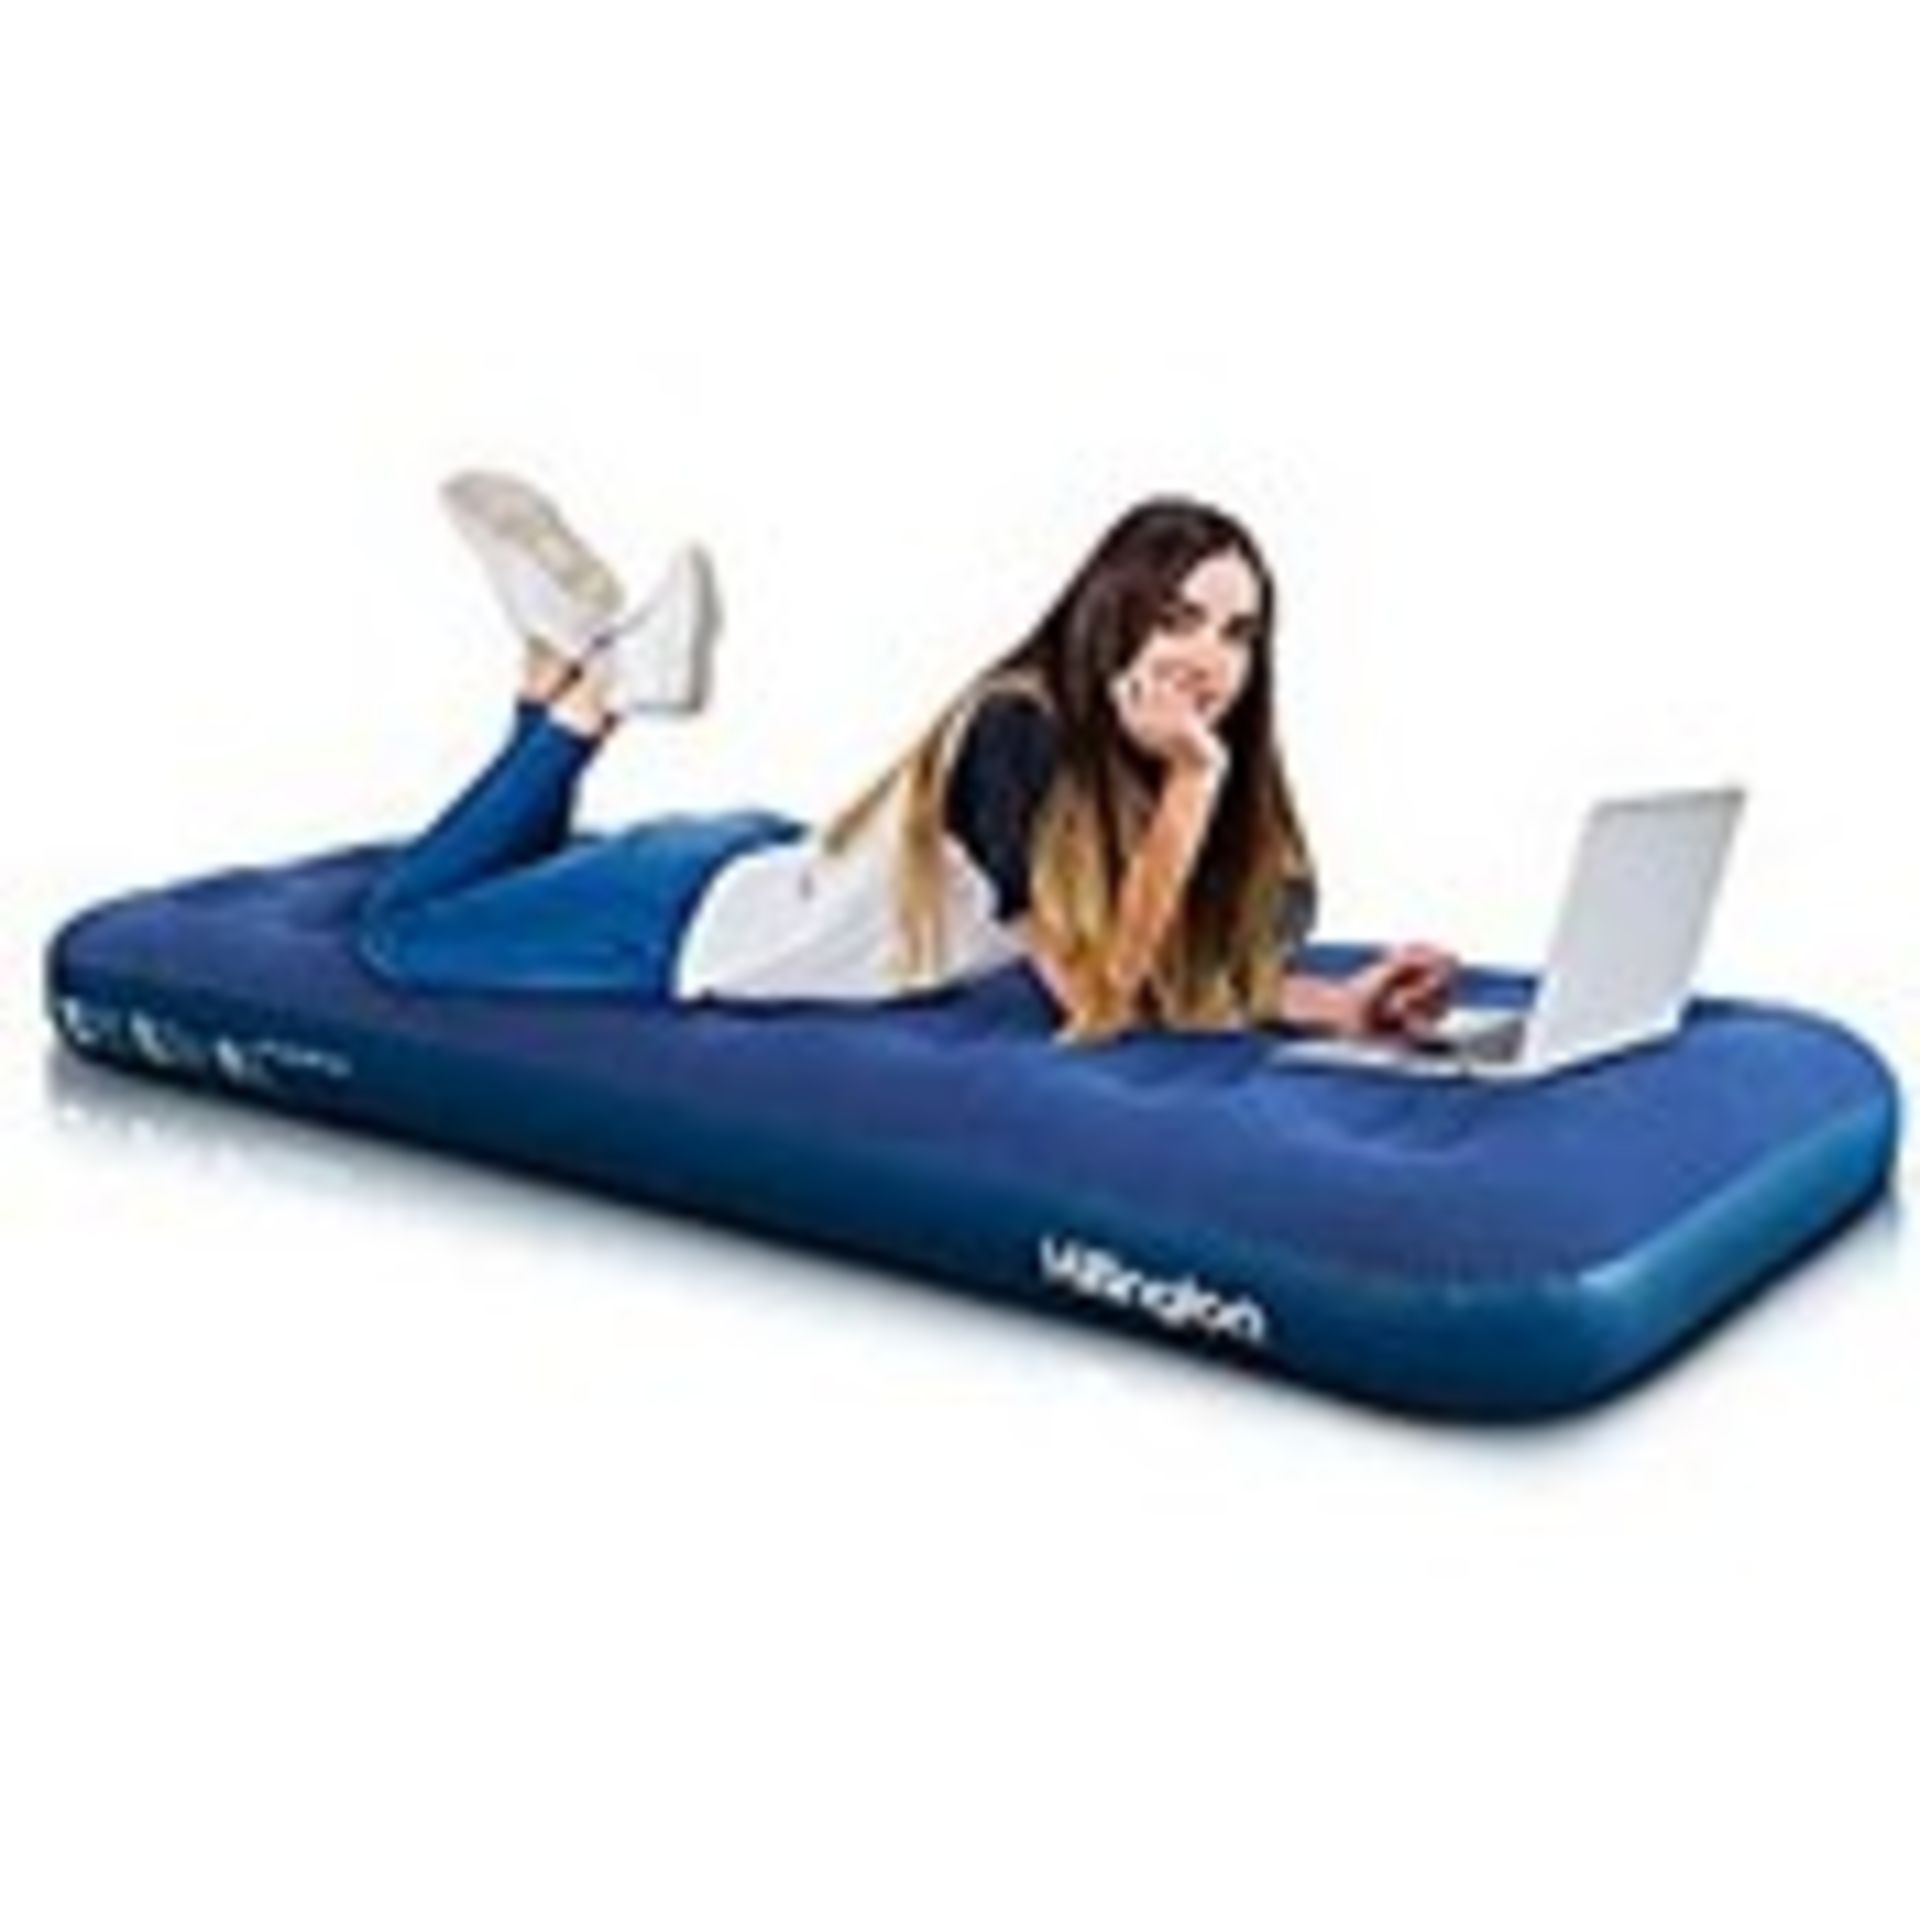 RRP £12.20 Hillington Flocked Air Bed Ideal for Camping or as a Temporary Guest Airbed